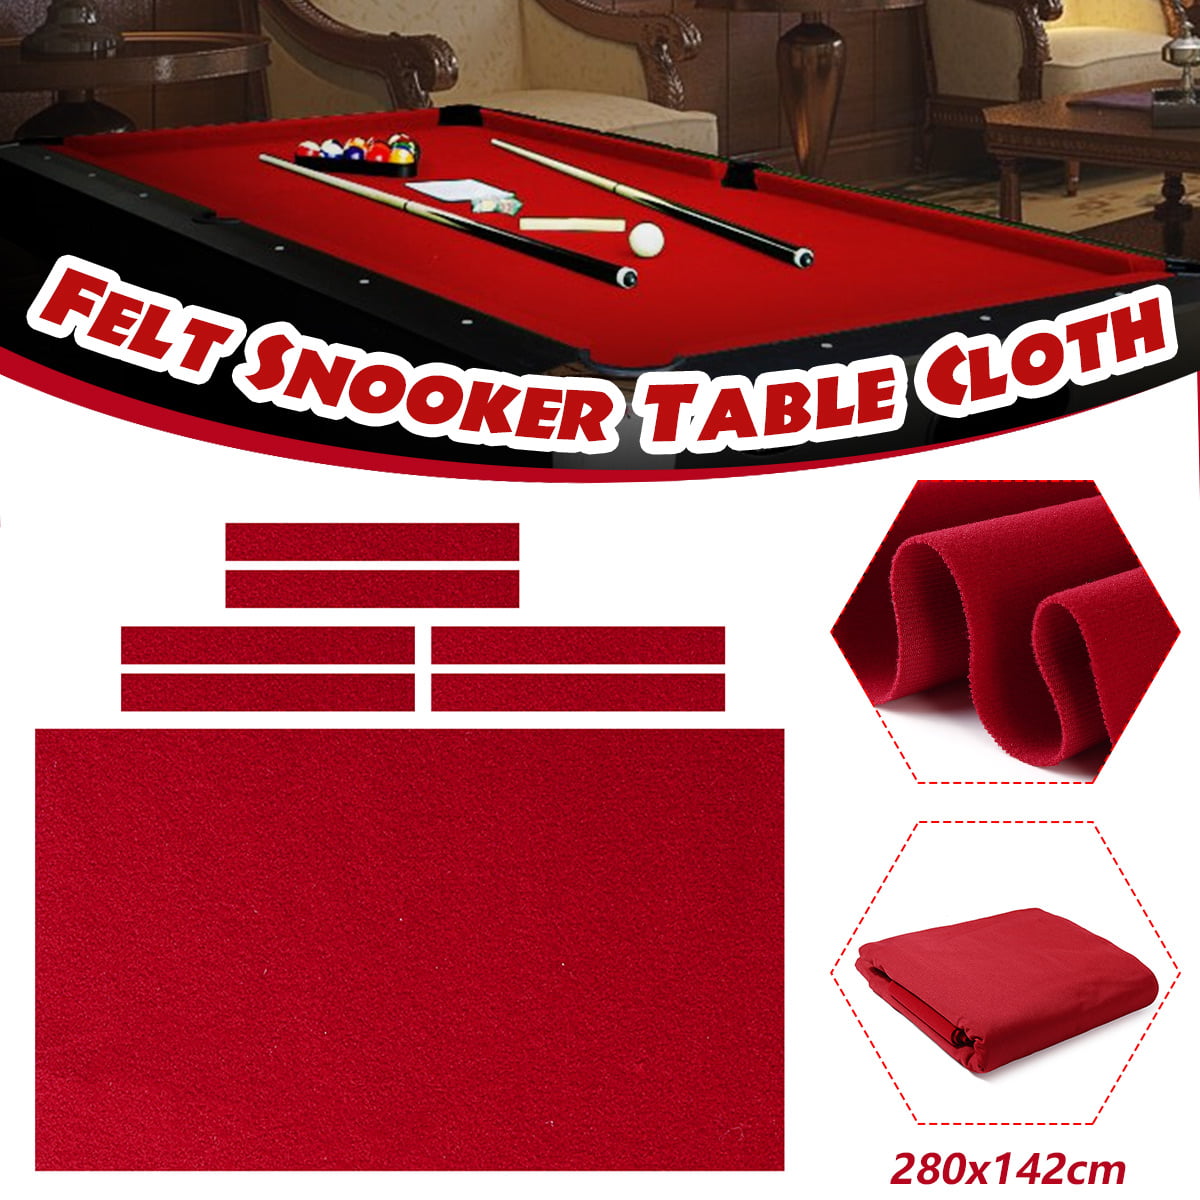 Professional Billiard Cloth Felt Cover W/ 6 Strips For 9FT Snooker Pool 